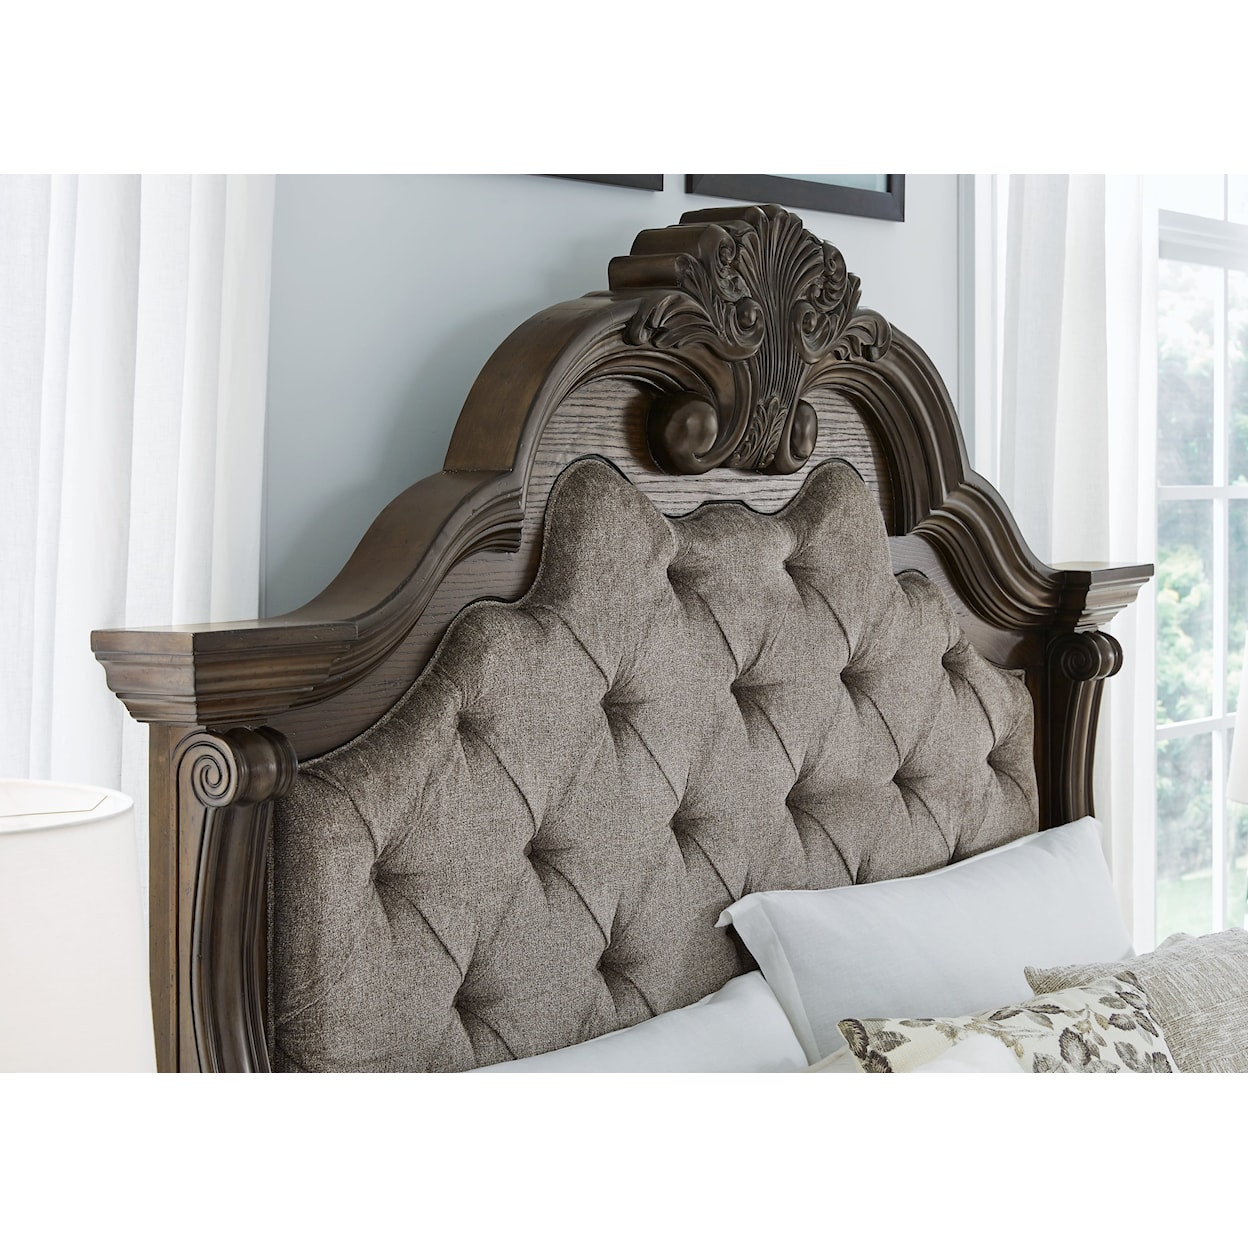 Signature Design by Ashley Furniture Maylee Queen Upholstered Bed